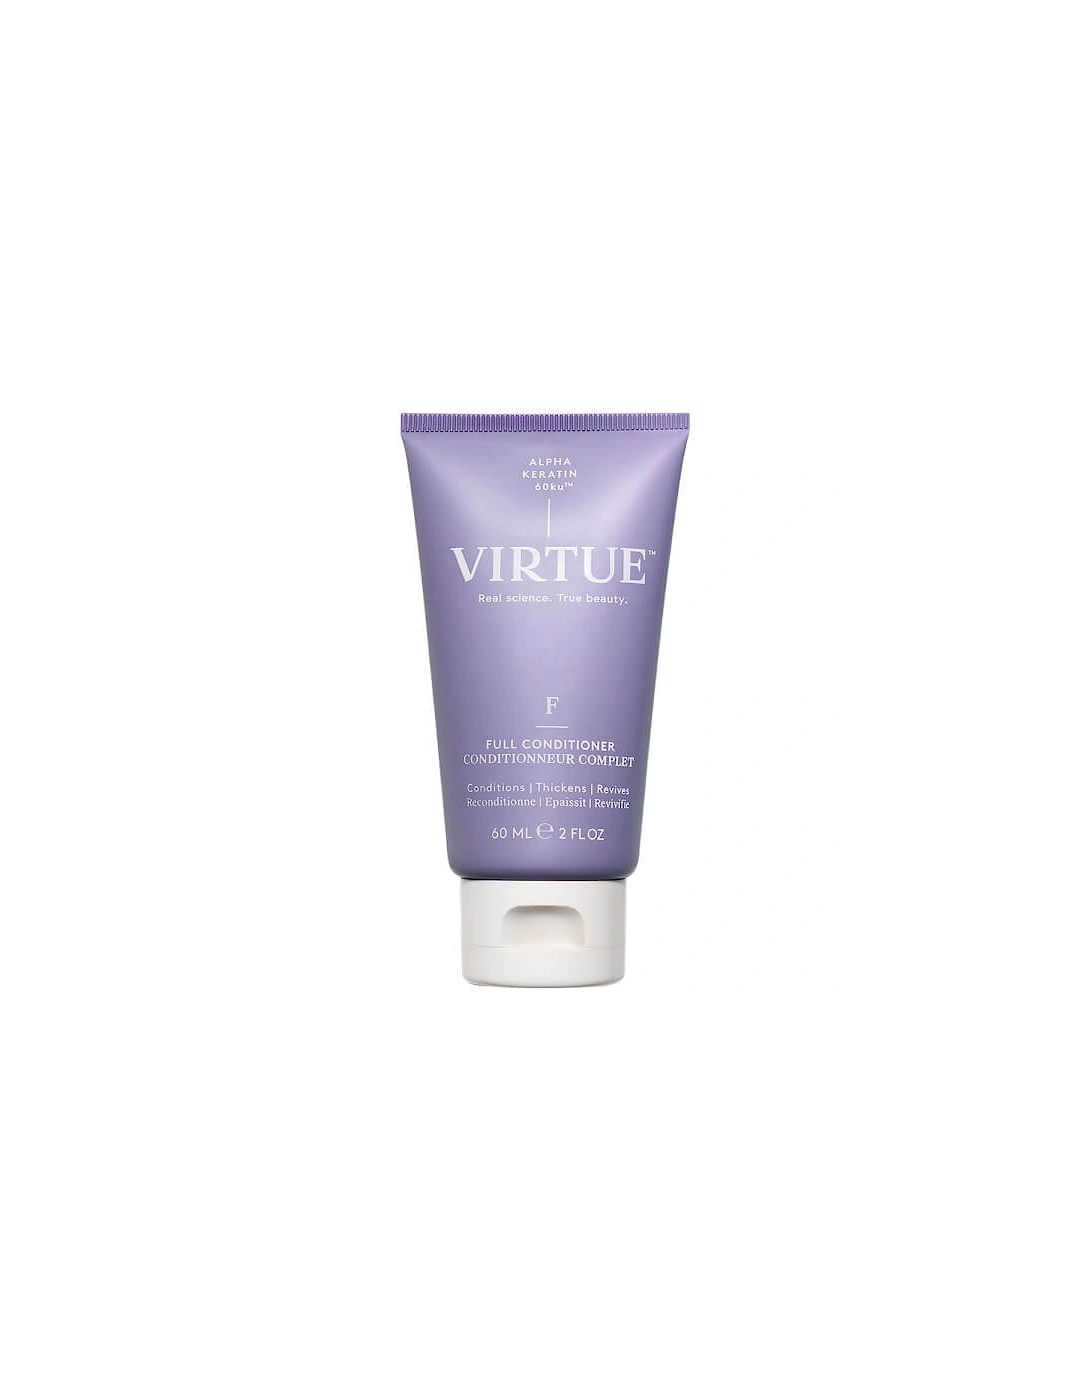 Full Conditioner Travel Size 2 oz - VIRTUE, 2 of 1